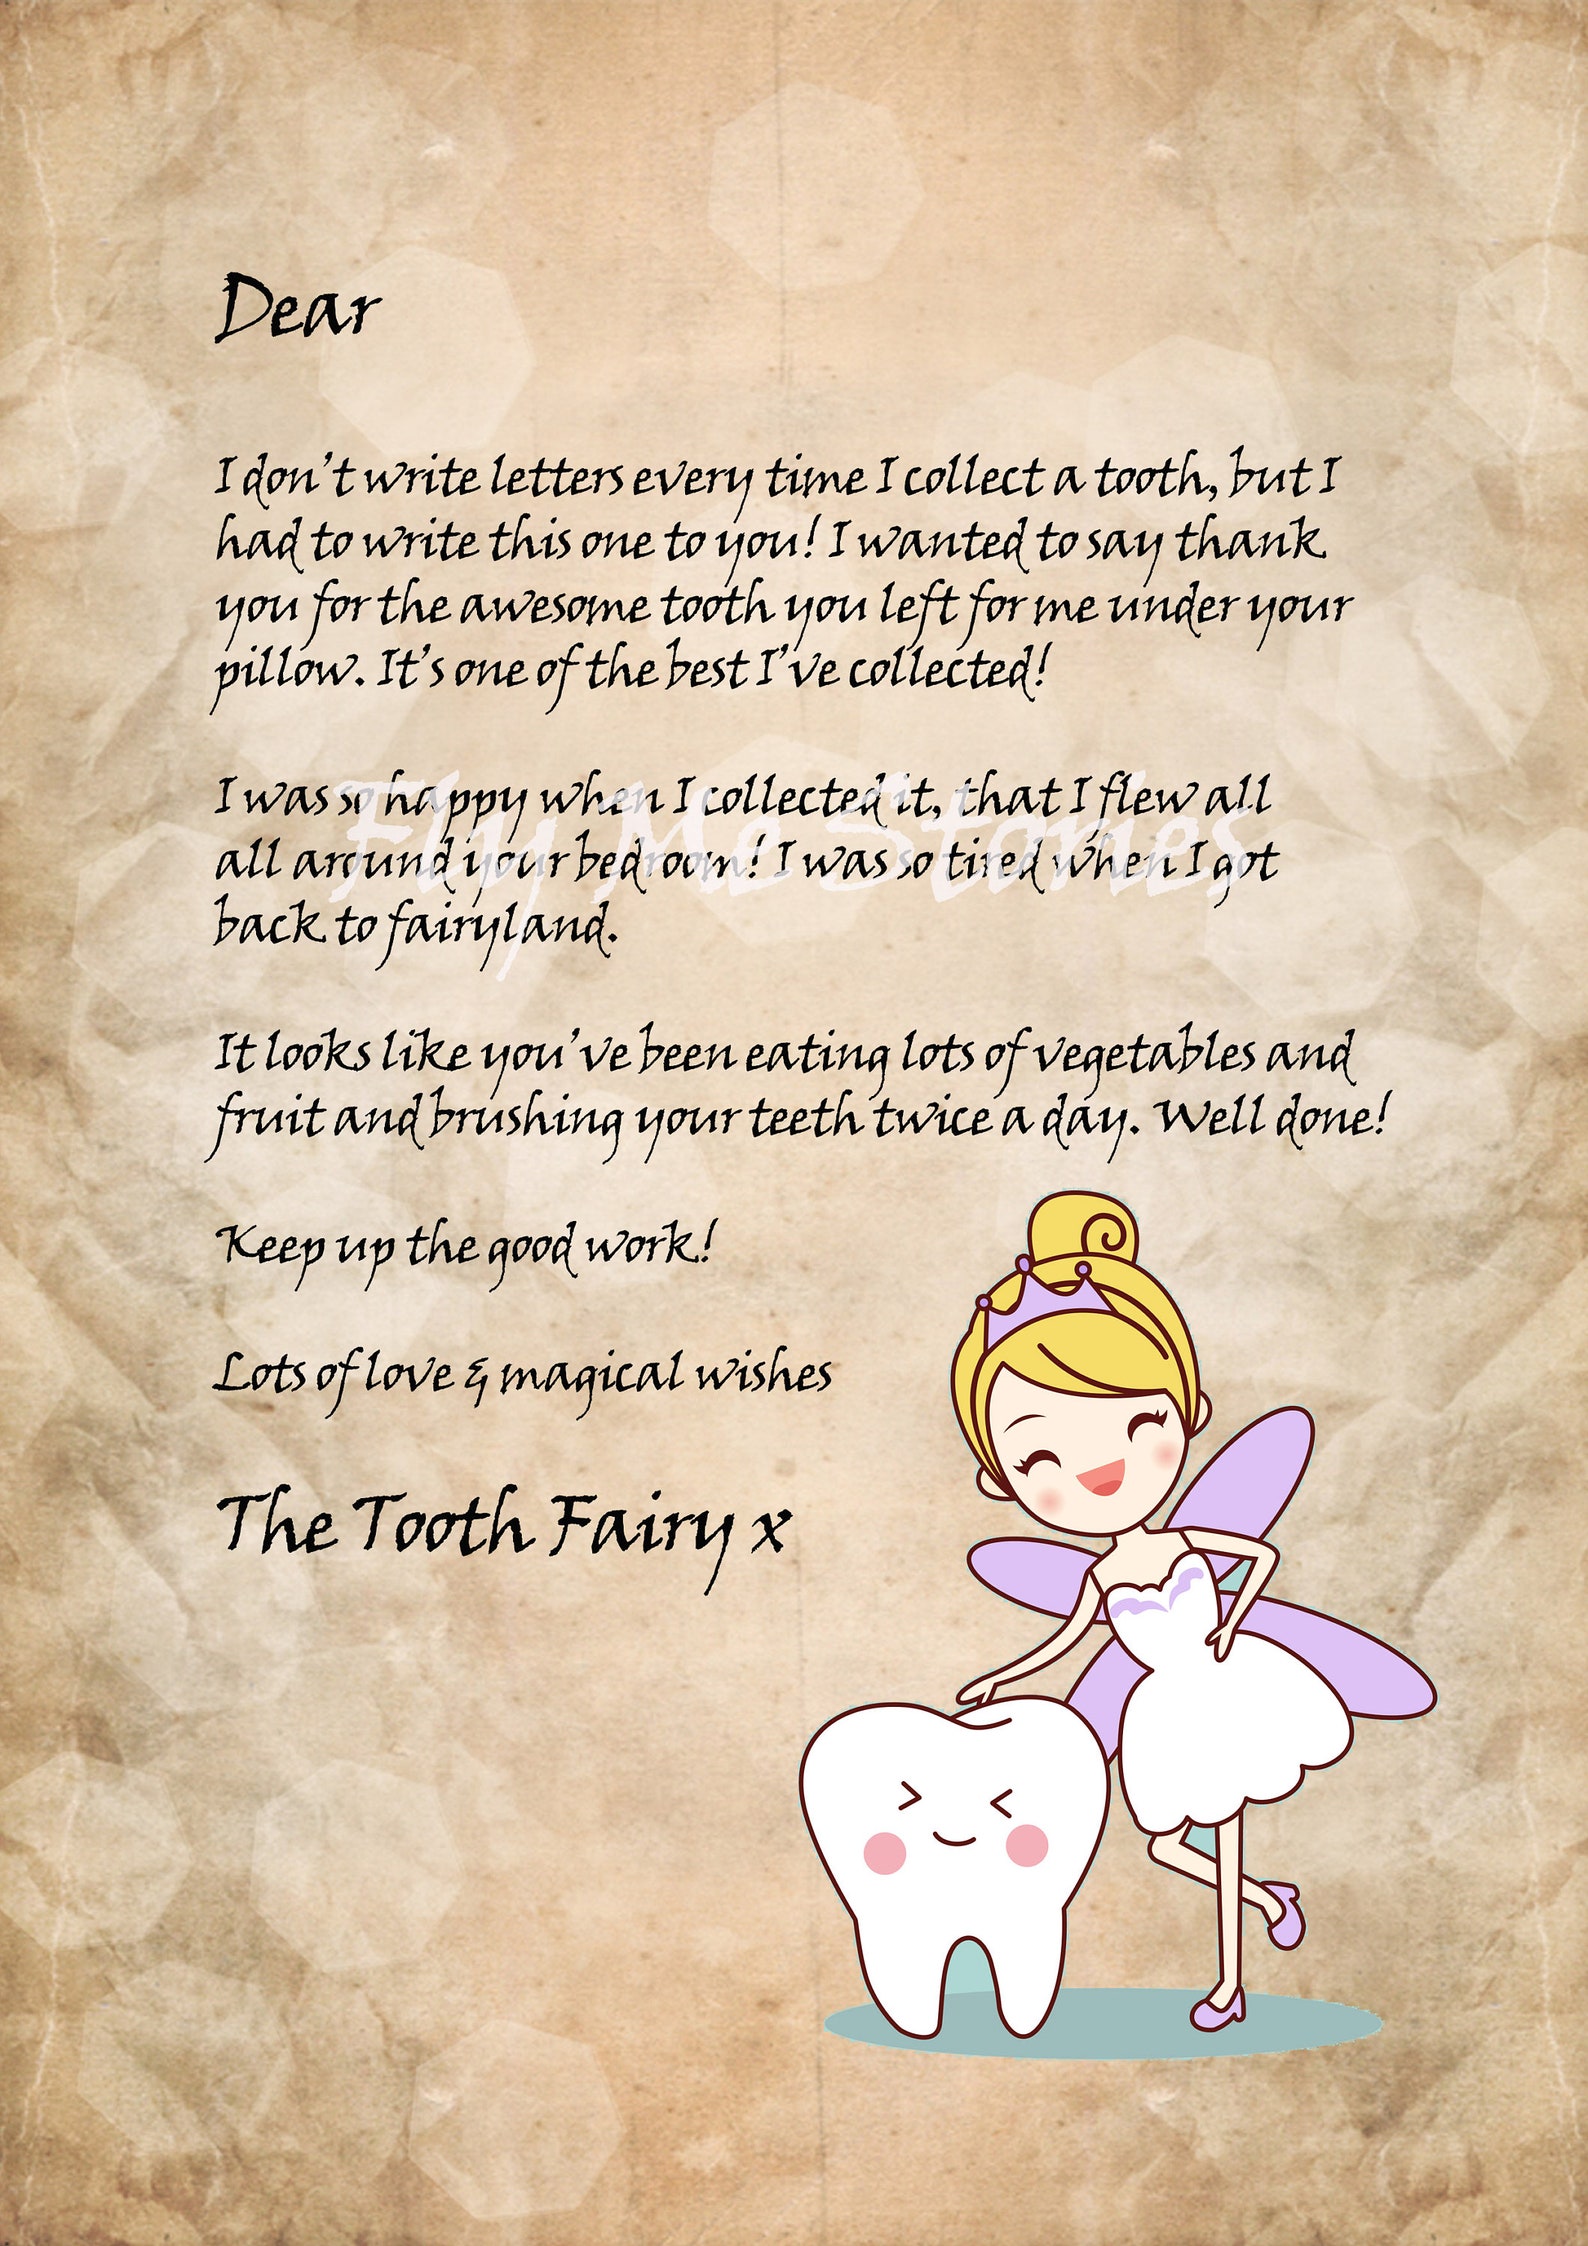 printable-tooth-fairy-letter